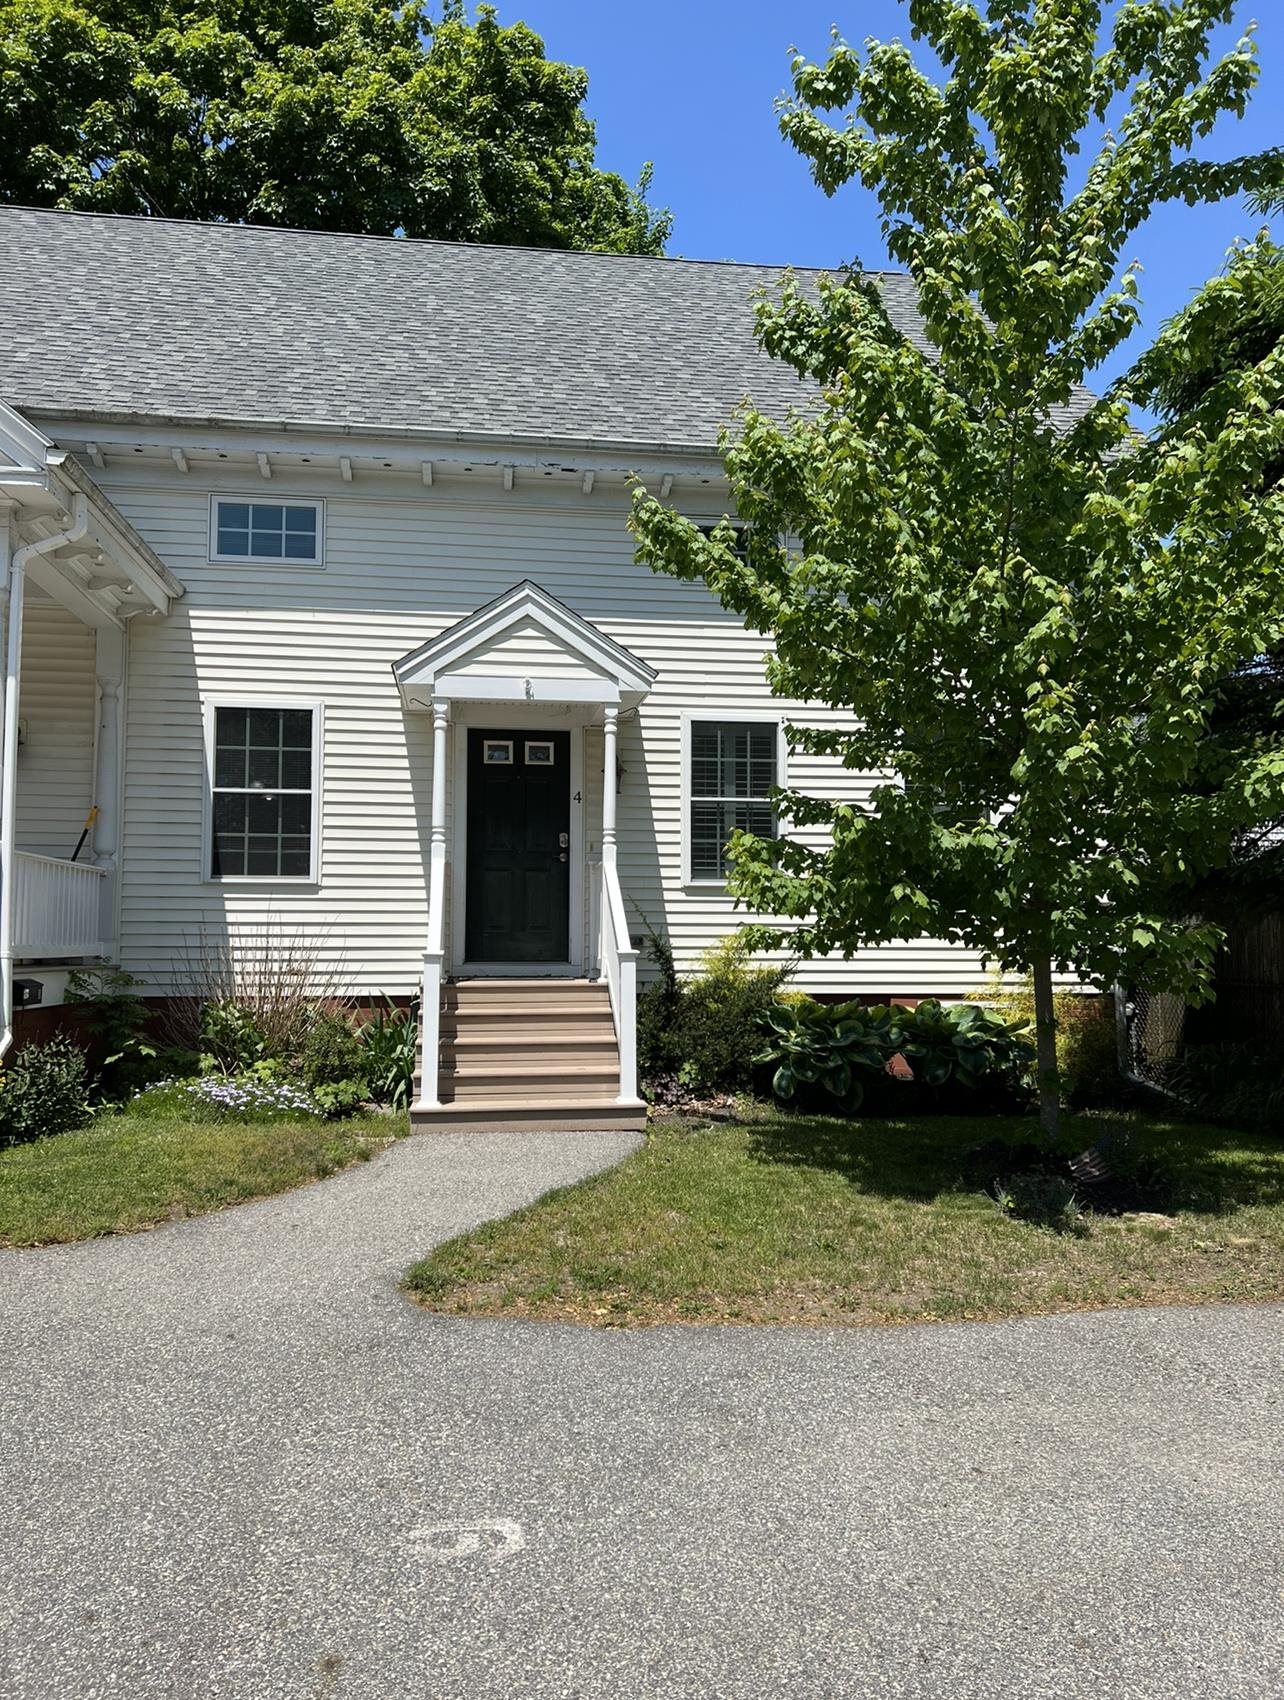 MLS 4954632: 16 Hall Place-Unit 4, Exeter NH